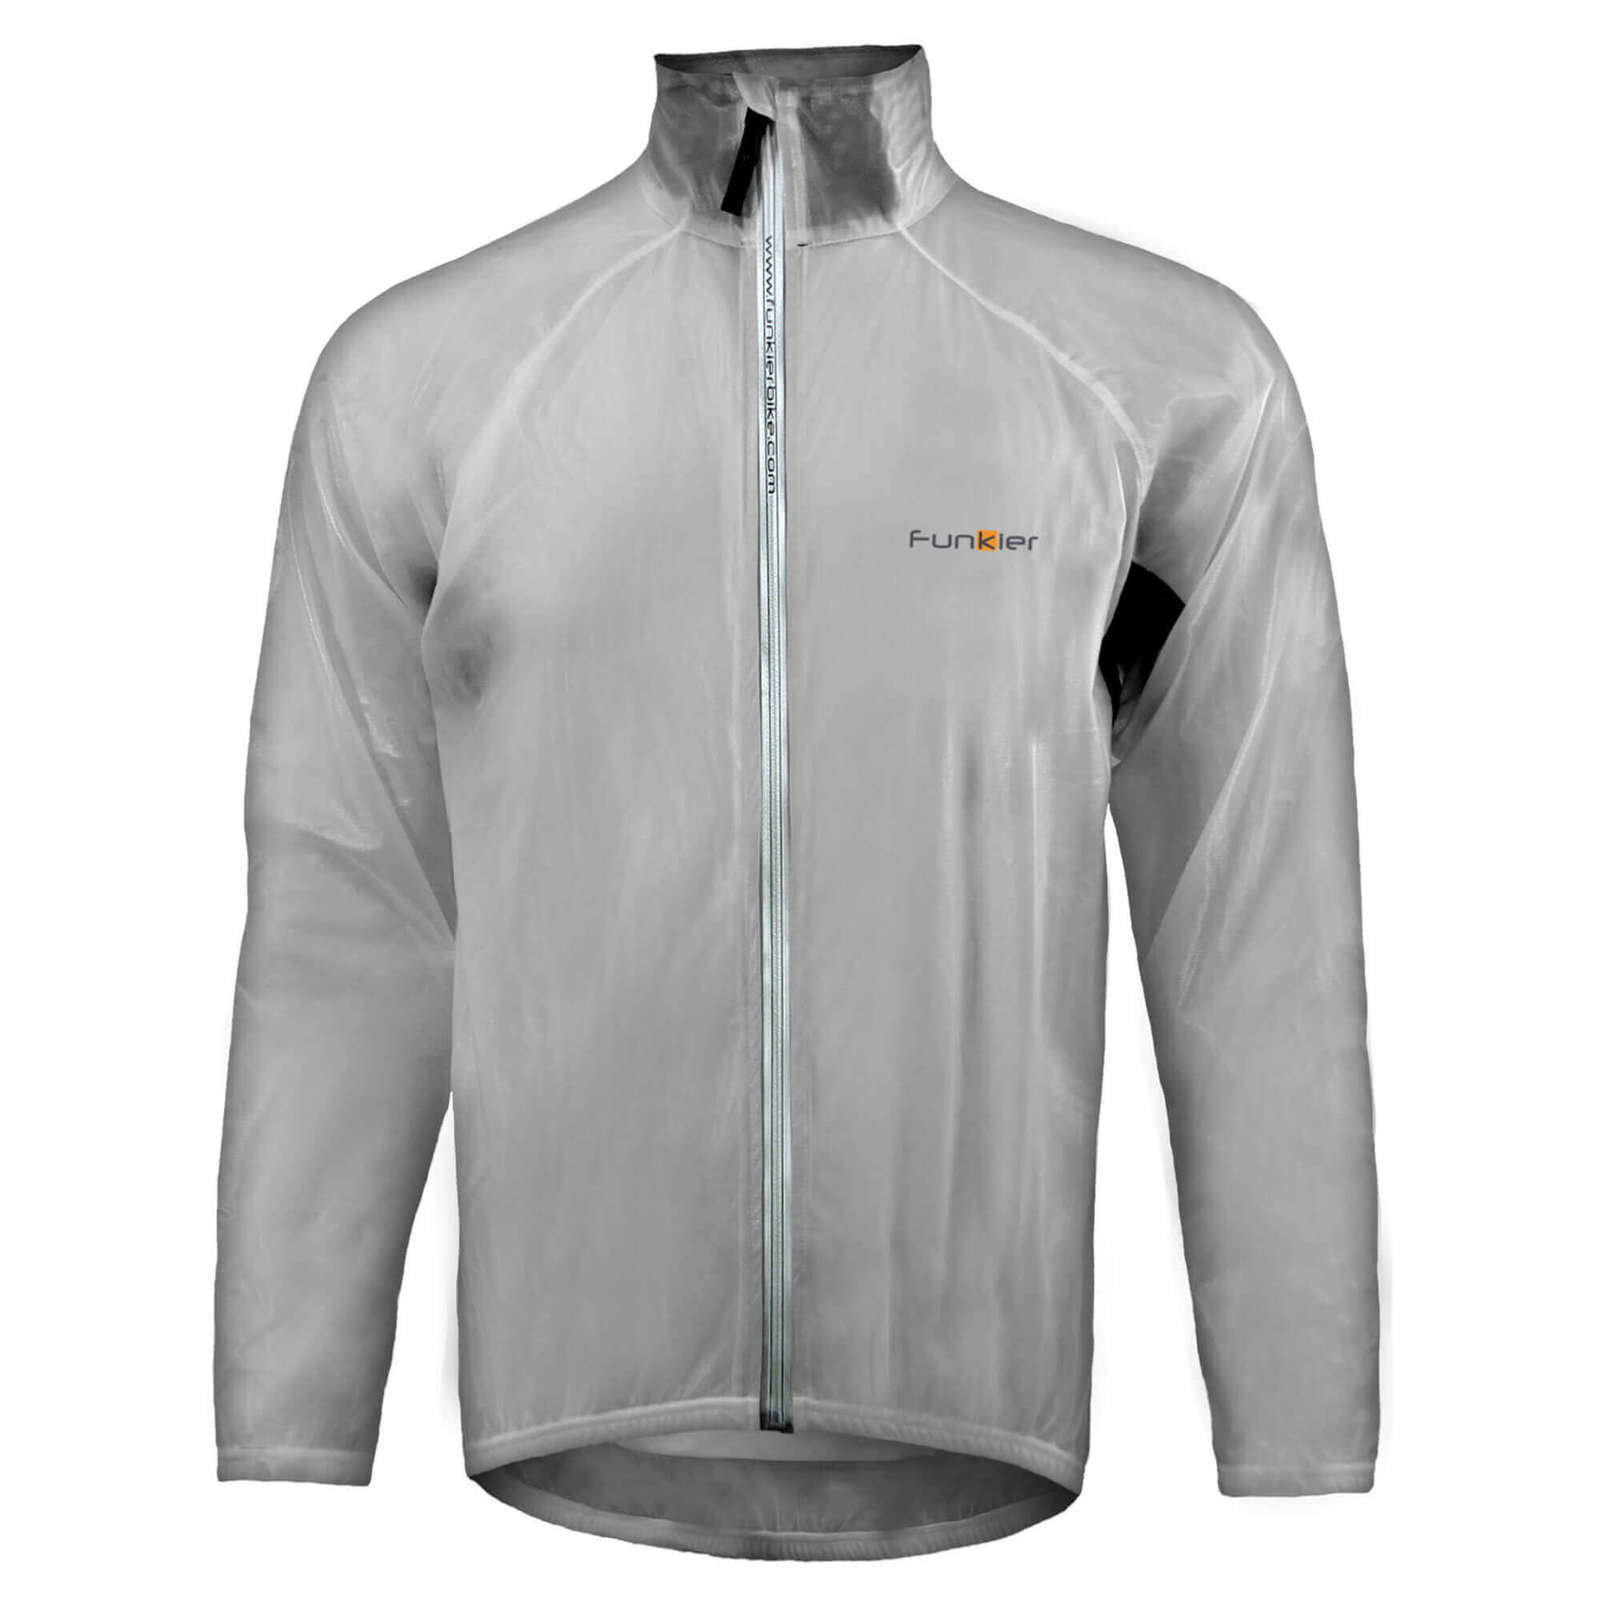 Cycling Jacket, Vest Funkier Lecco Clear M Jacket